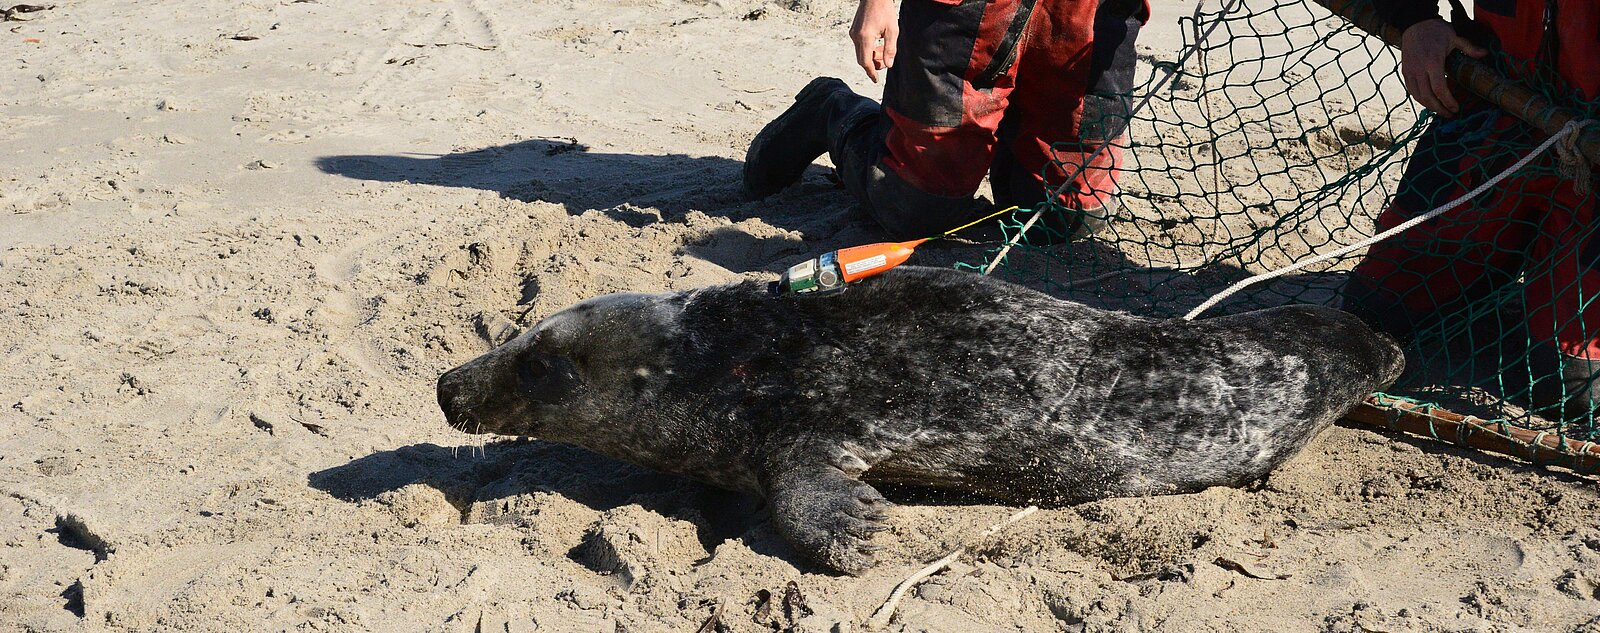 Grey seal with a transmitter